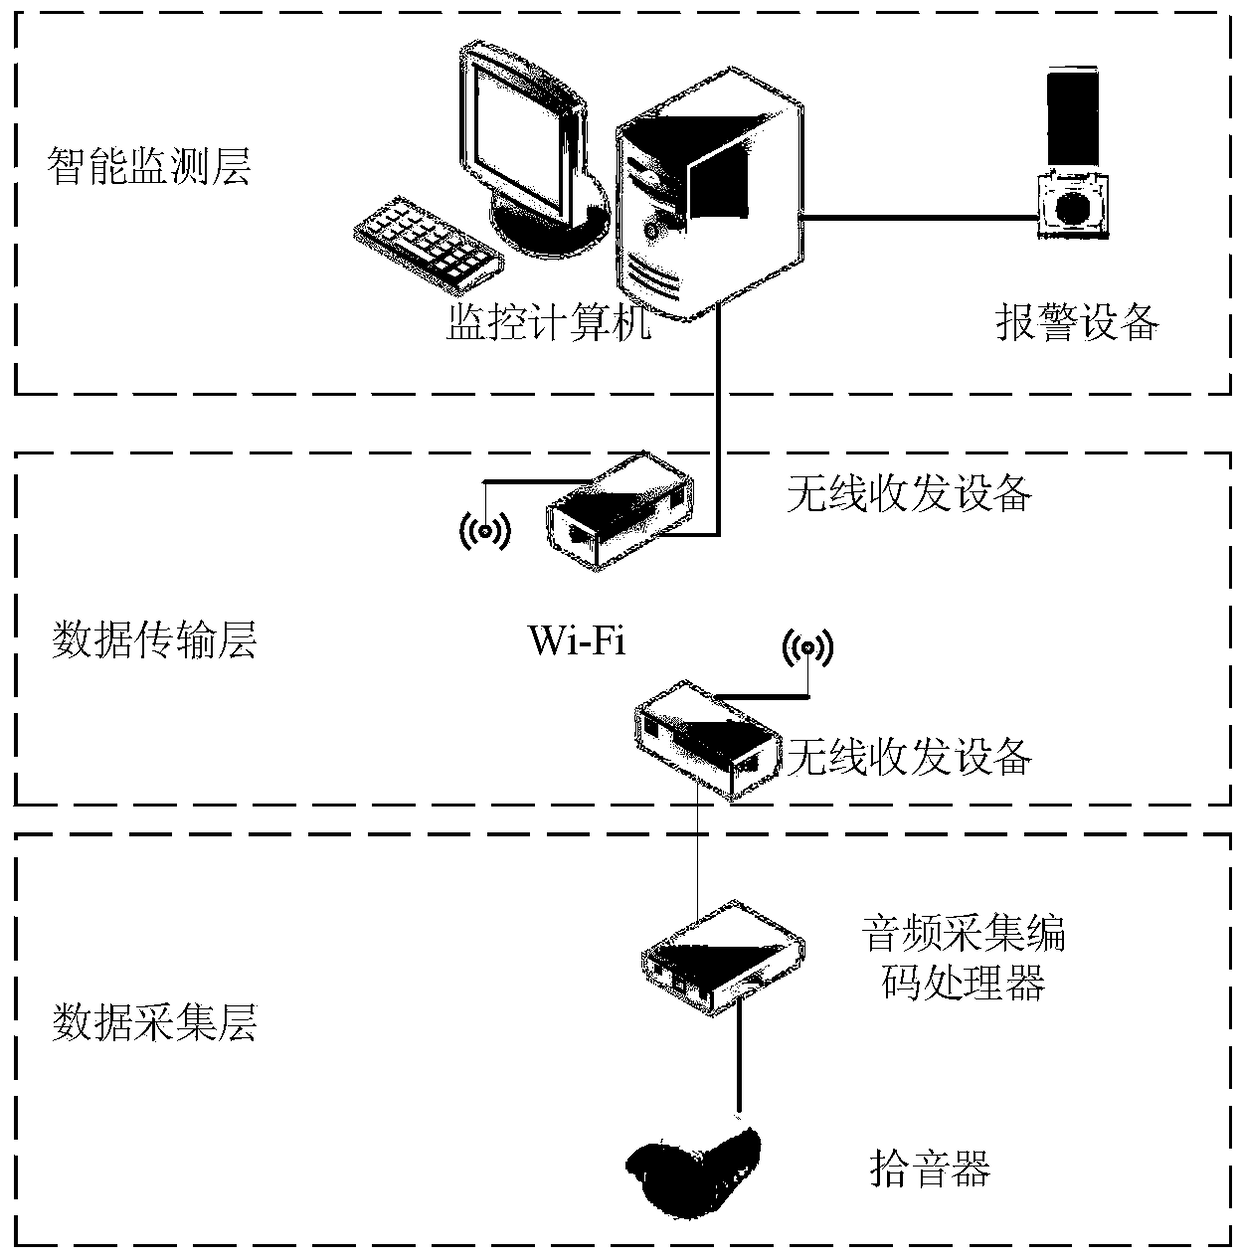 Live pig abnormal sound intelligent monitoring system and method